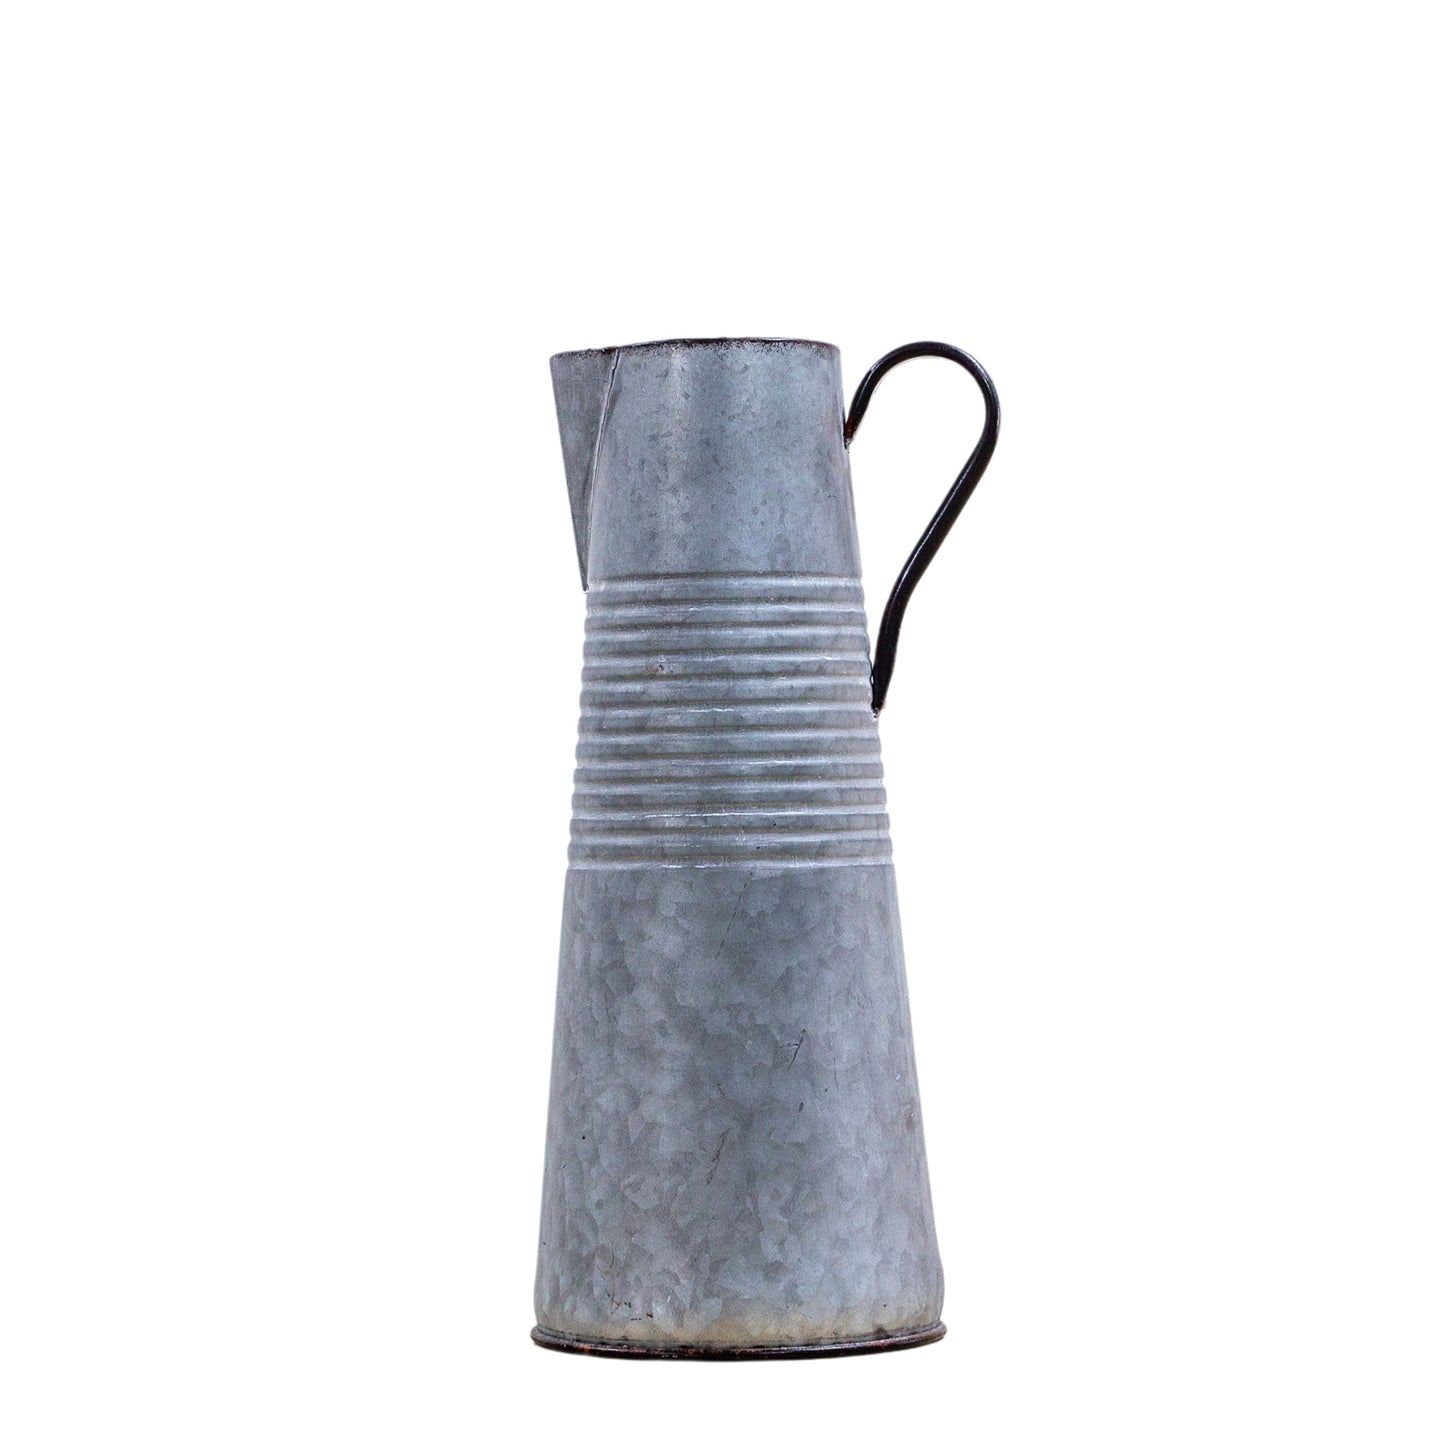 Levens Galvanised Pitcher Small